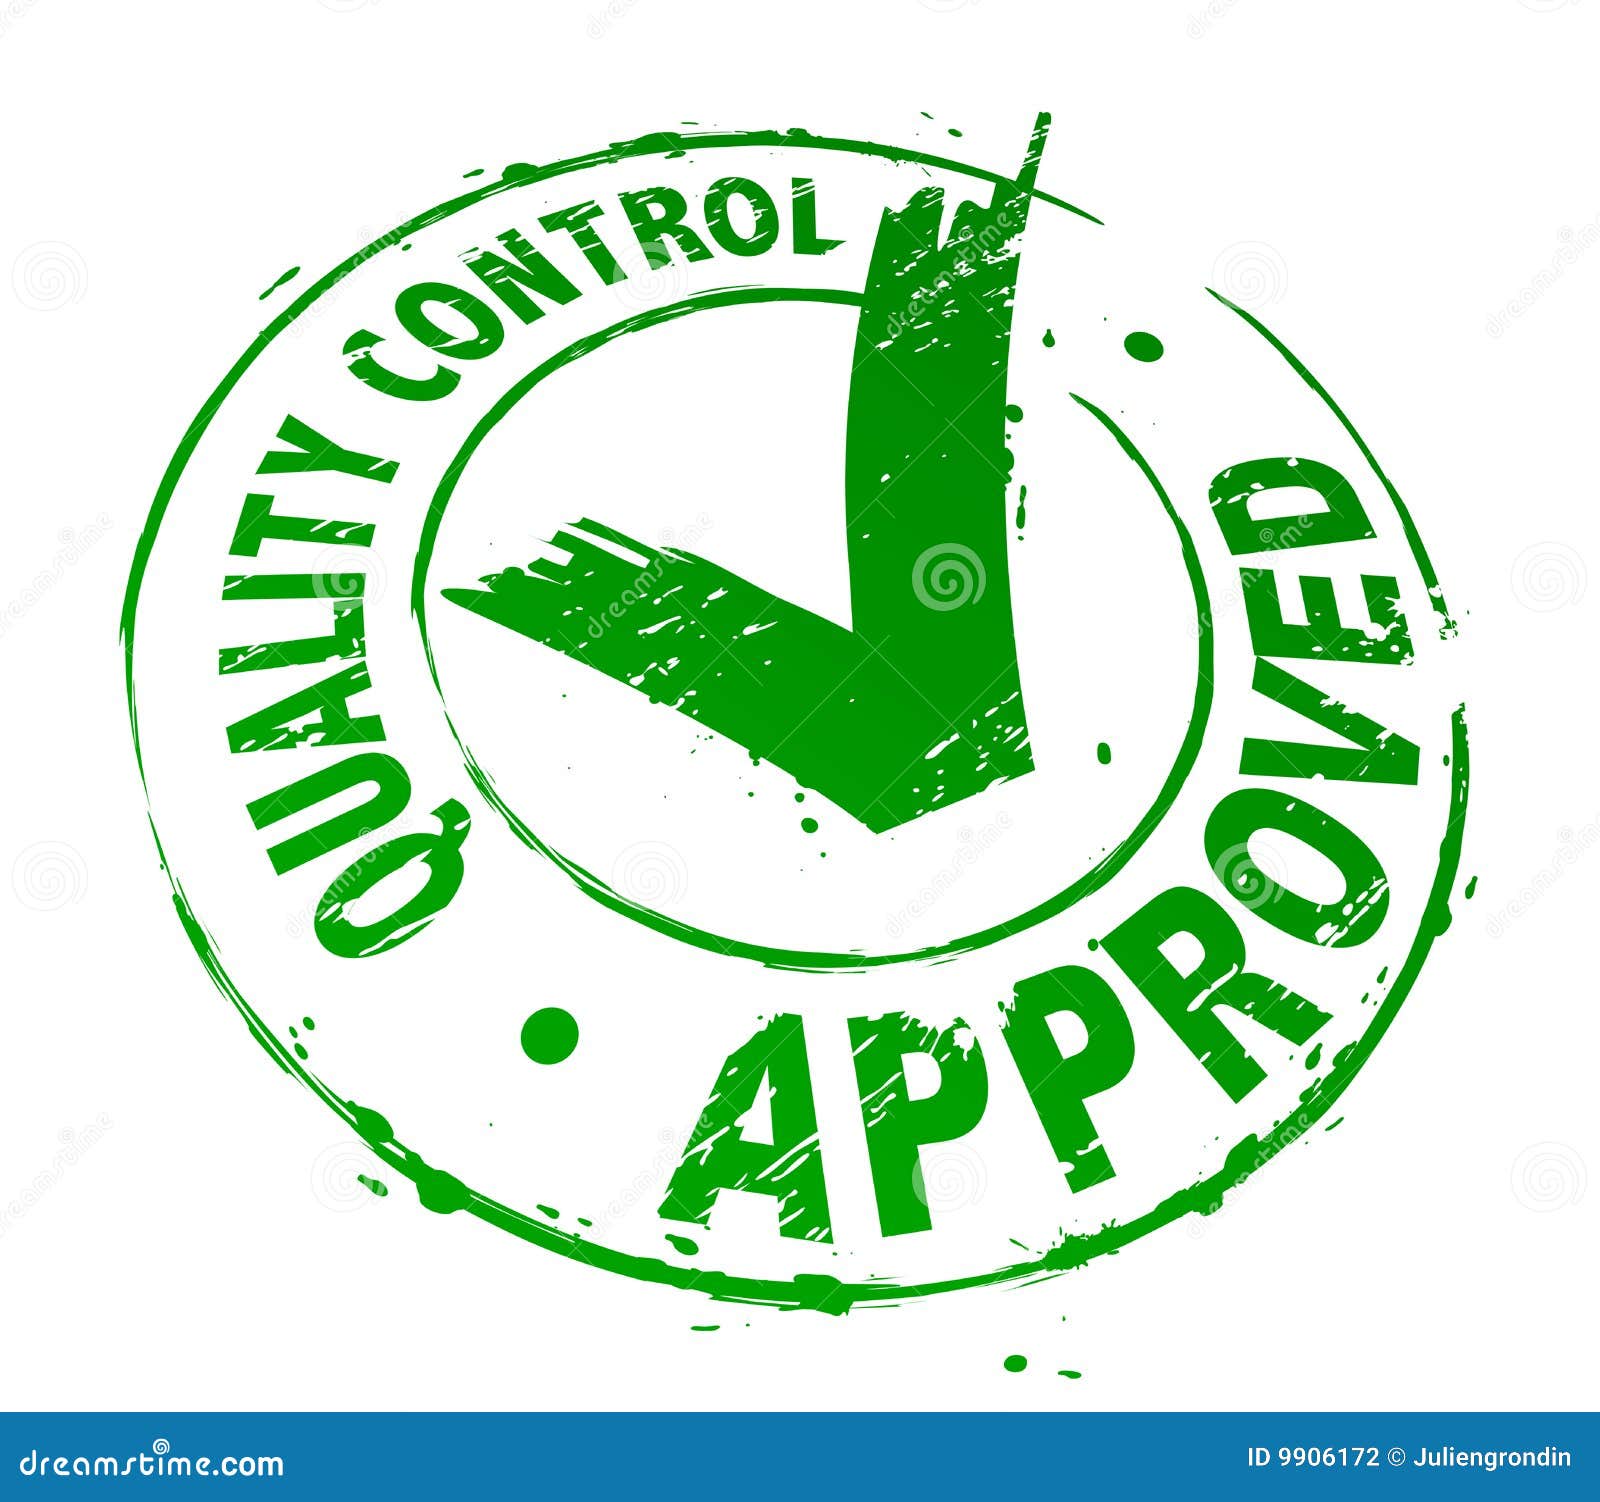 quality inspection clipart - photo #35